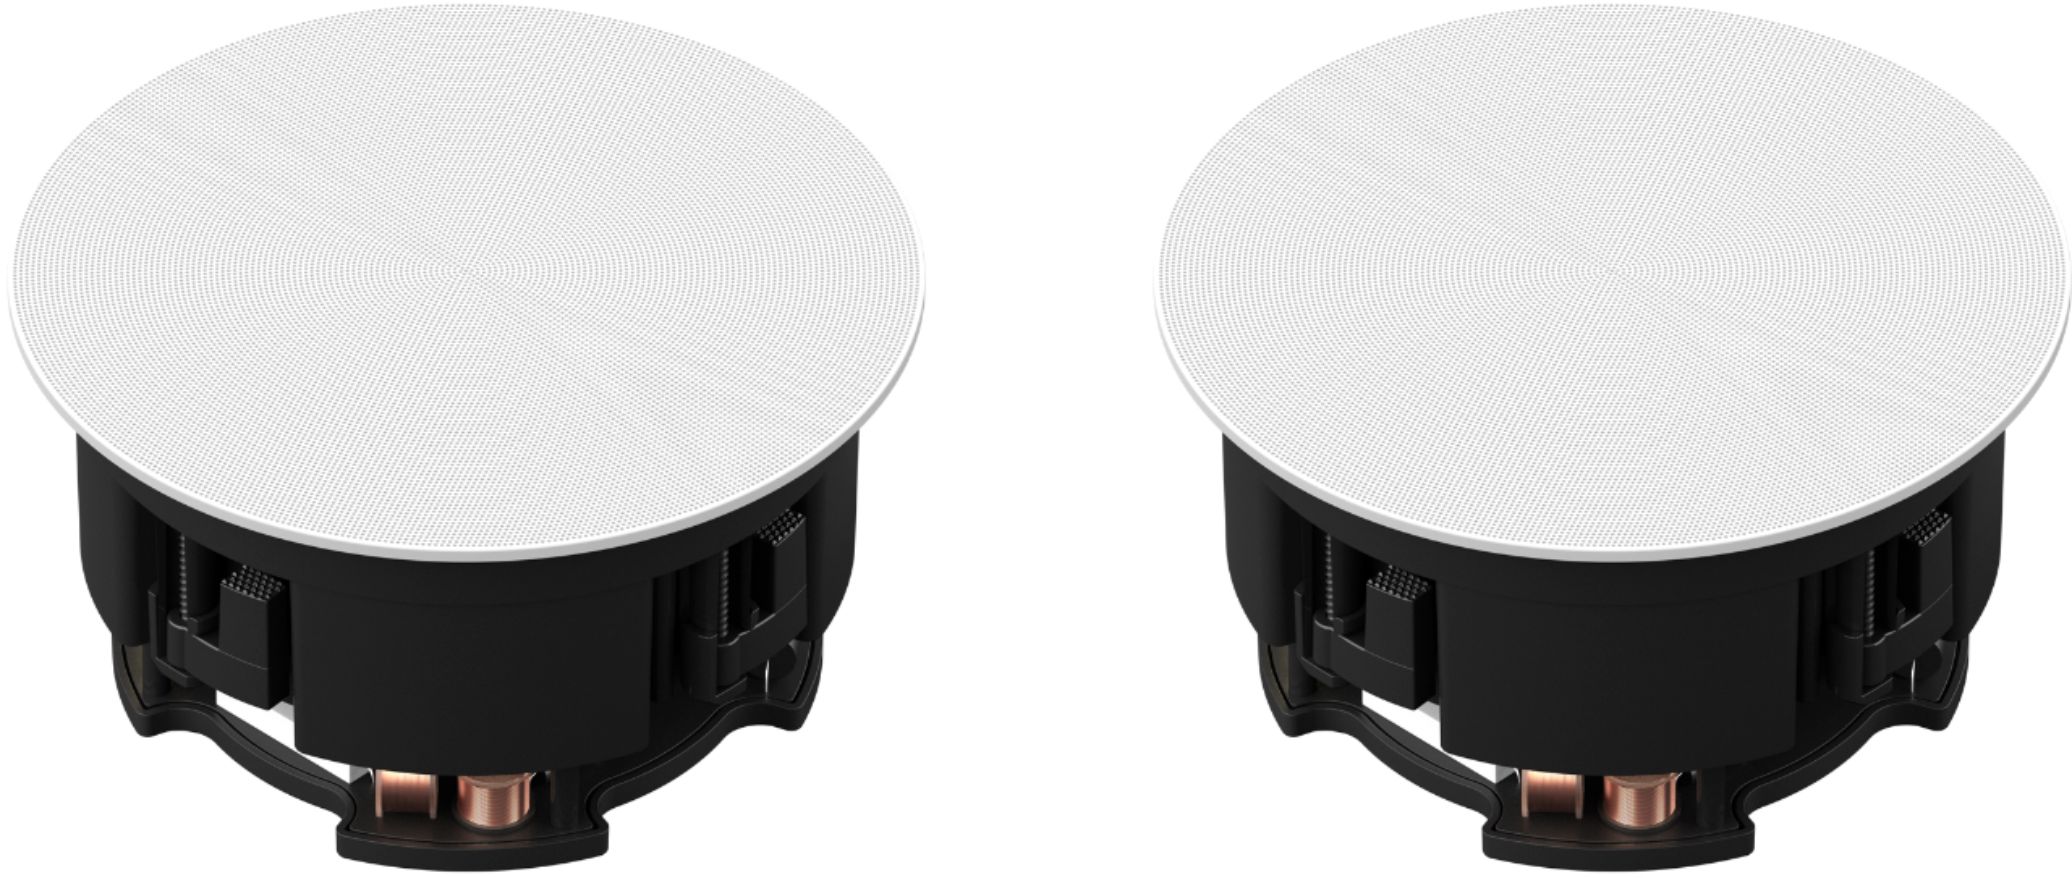 Angle View: Yamaha - 8" 3-Way In-Ceiling Speakers (Pair) - White